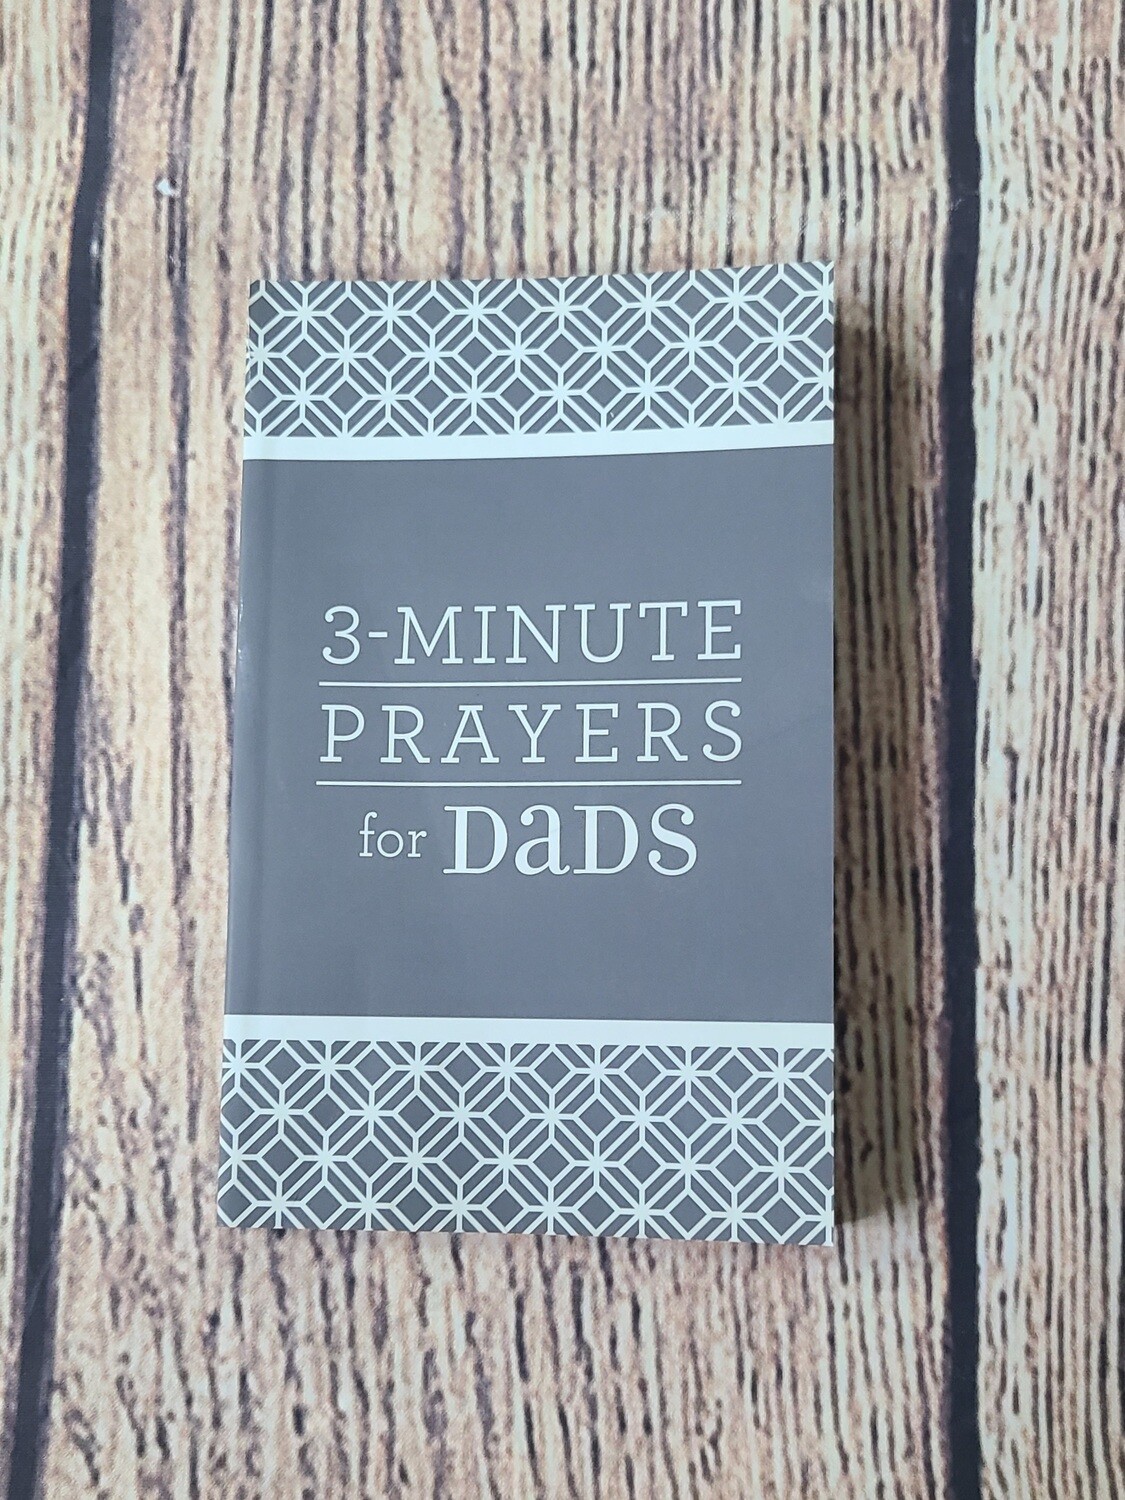 3-Minute Prayers for Dads by Barbour Publishing - Good Condition